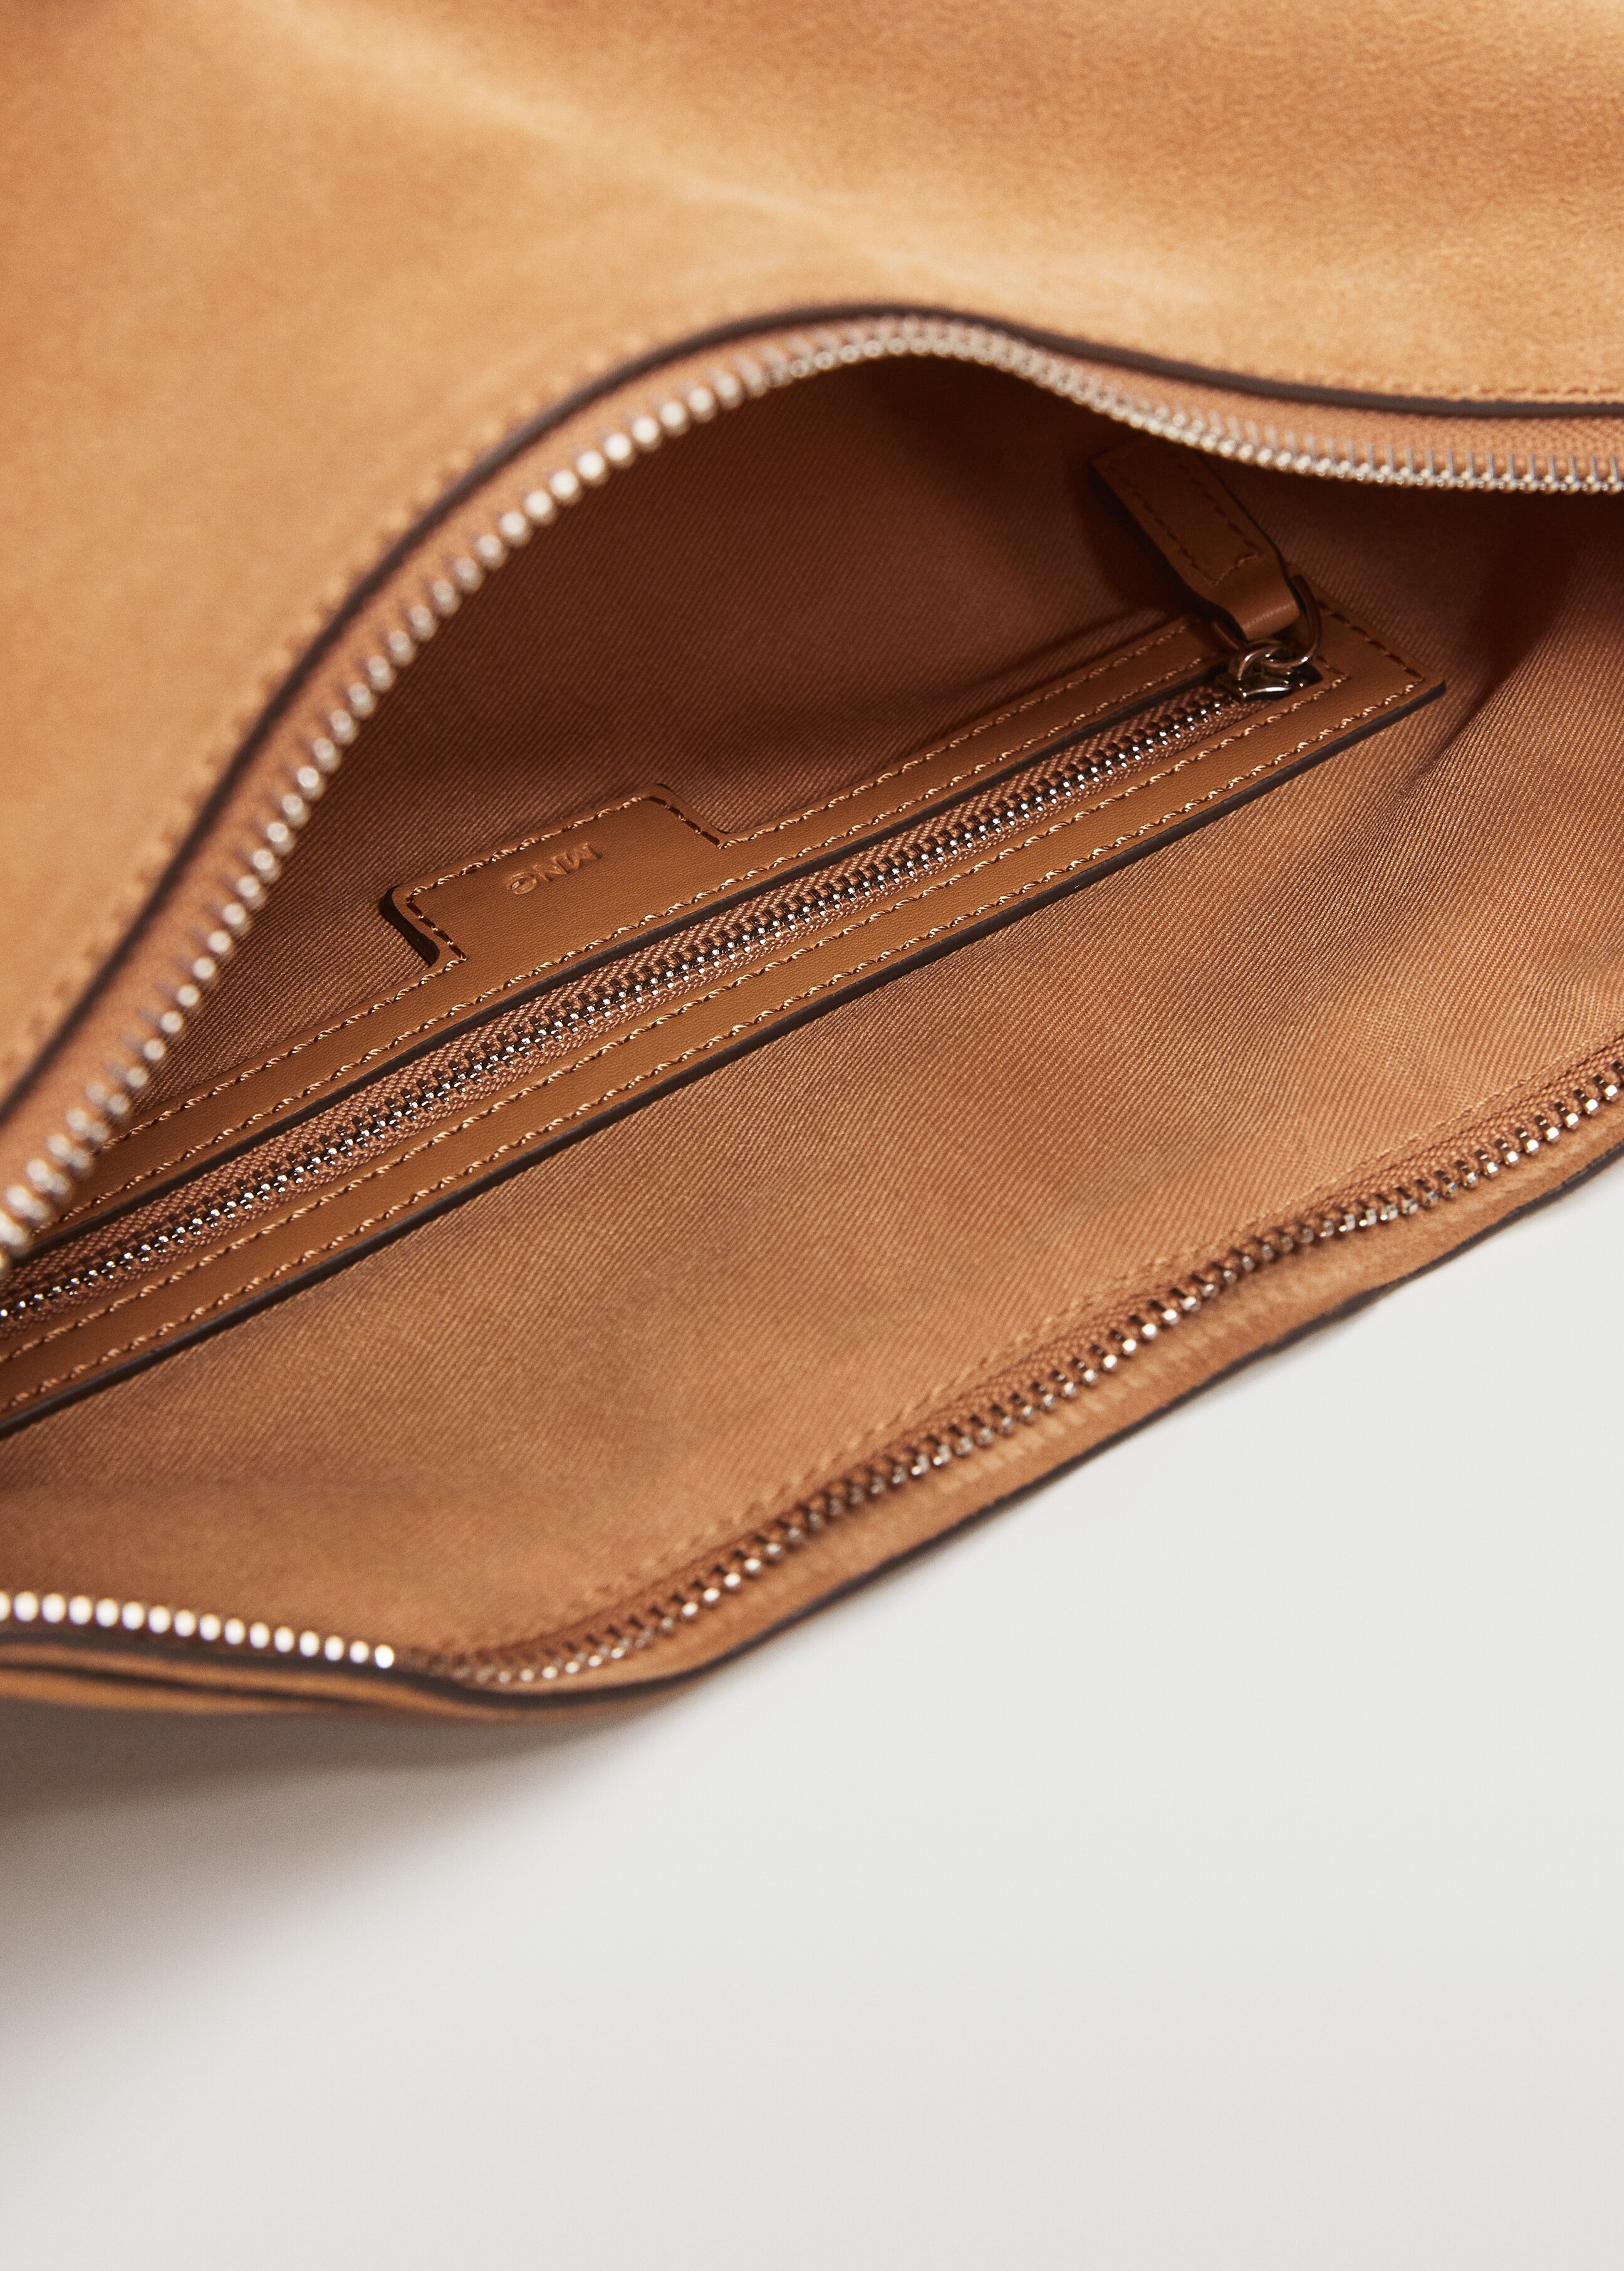 Leather baguette bag - Details of the article 2